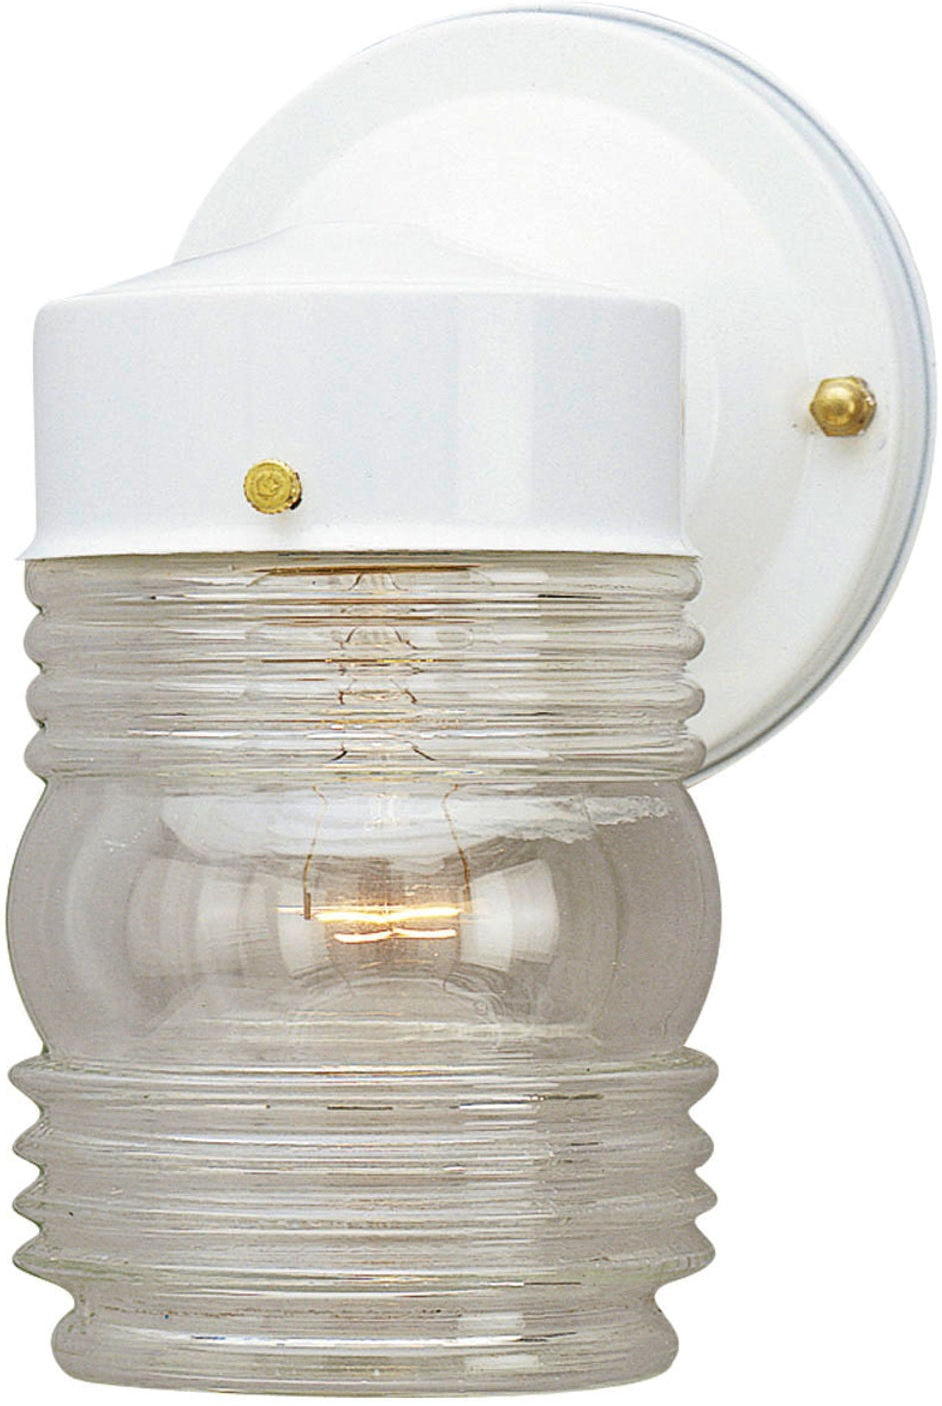 buy wall mount light fixtures at cheap rate in bulk. wholesale & retail lighting replacement parts store. home décor ideas, maintenance, repair replacement parts